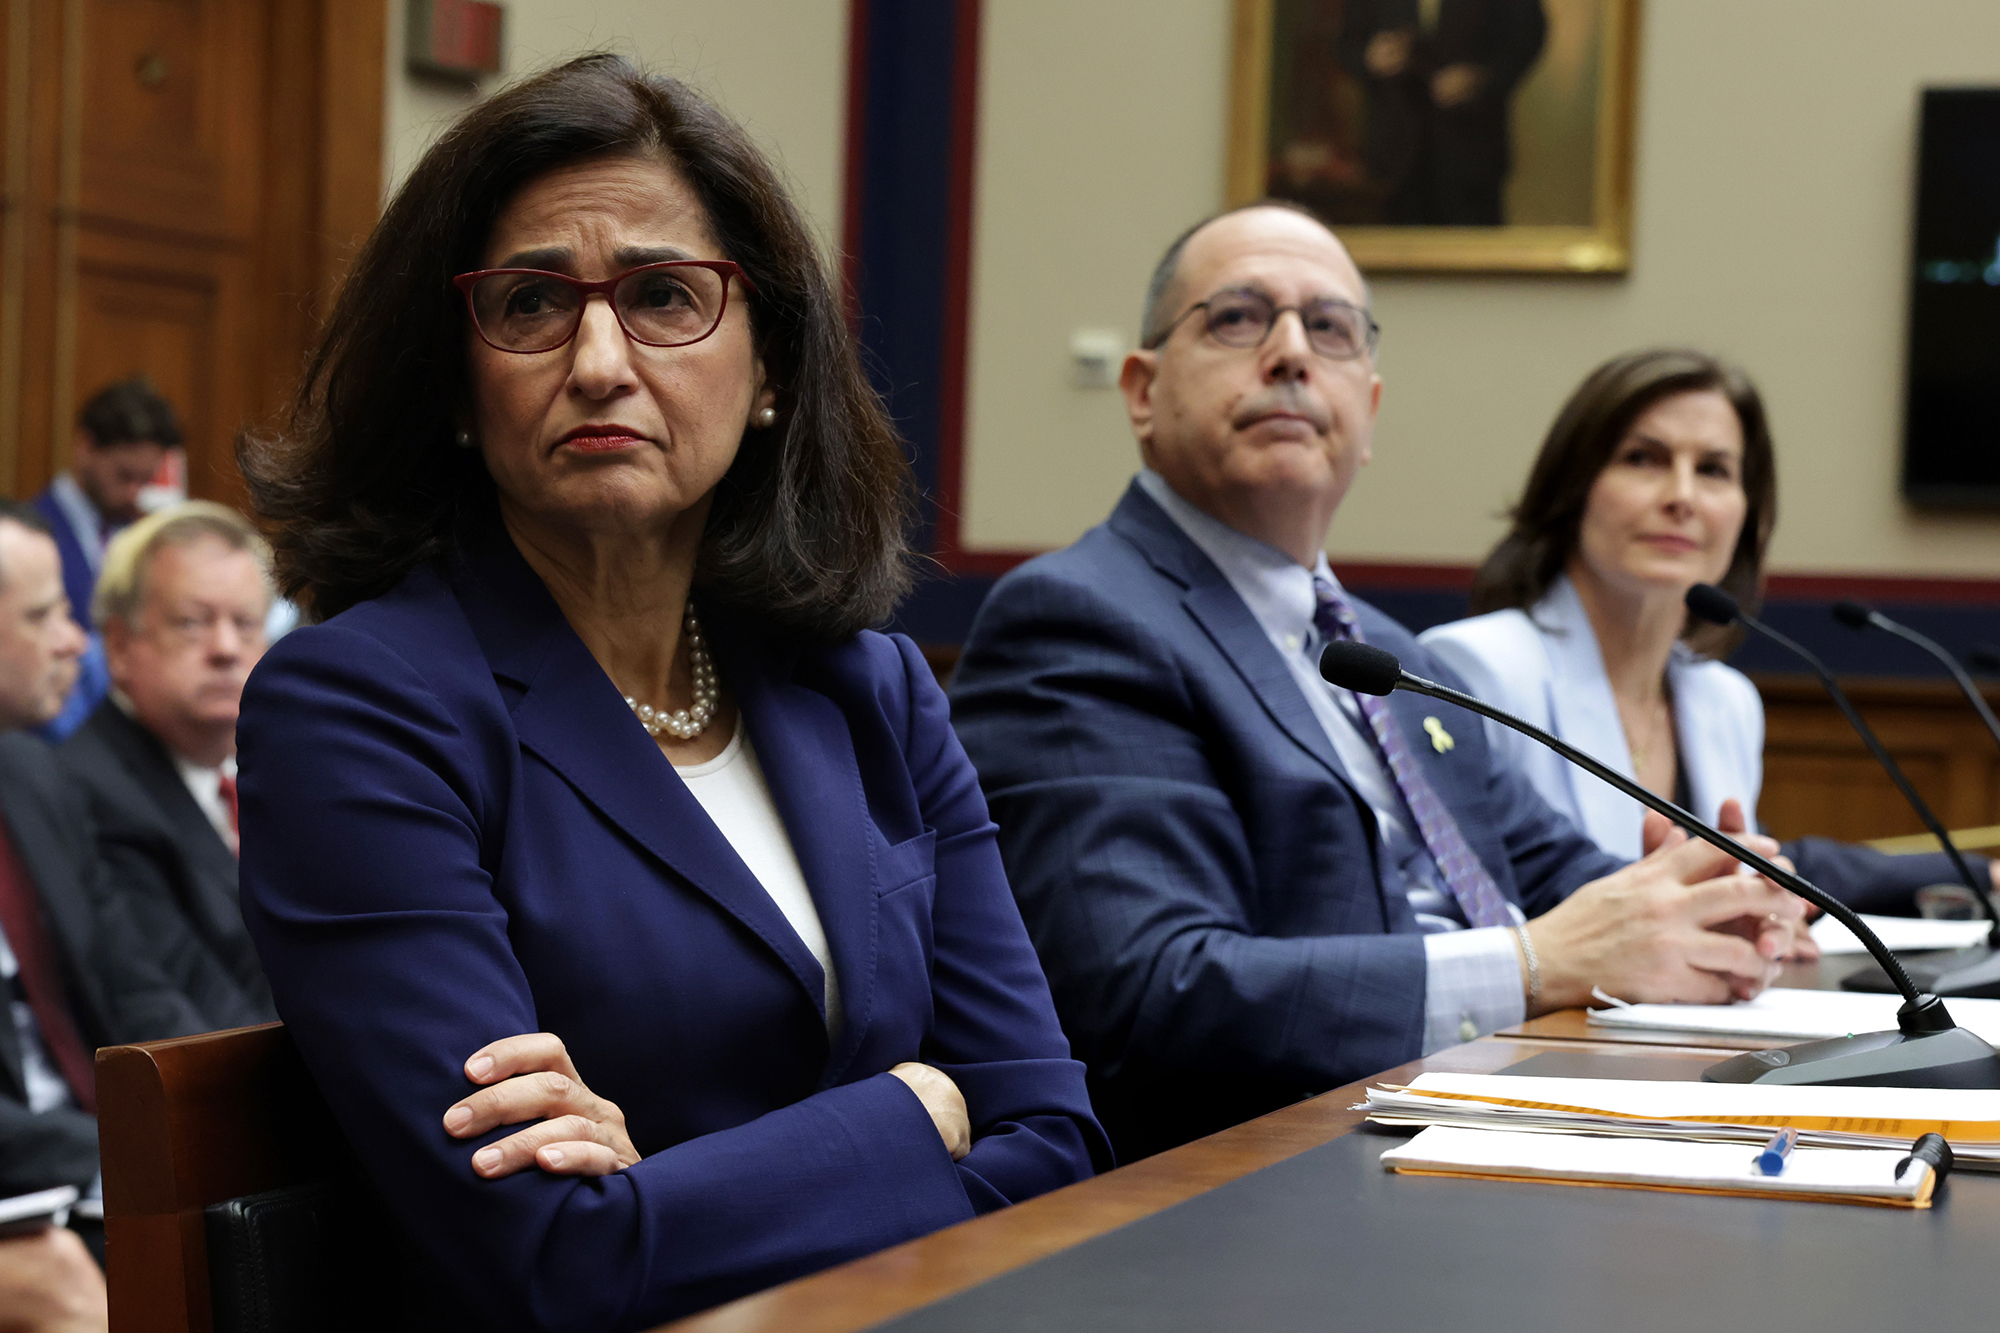 (L-R) President of Columbia University Nemat “Minouche” Shafik, David Schizer, Dean Emeritus and Harvey R. Miller Professor of Law & Economics and Columbia Law School, Co-Chair of Board of Trustees at Columbia University Claire Shipman testify before the House Committee on Education & the Workforce at Rayburn House Office Building on April 17, 2024 in Washington, DC. The committee held a hearing on “Columbia in Crisis: Columbia University’s Response to Antisemitism.” 